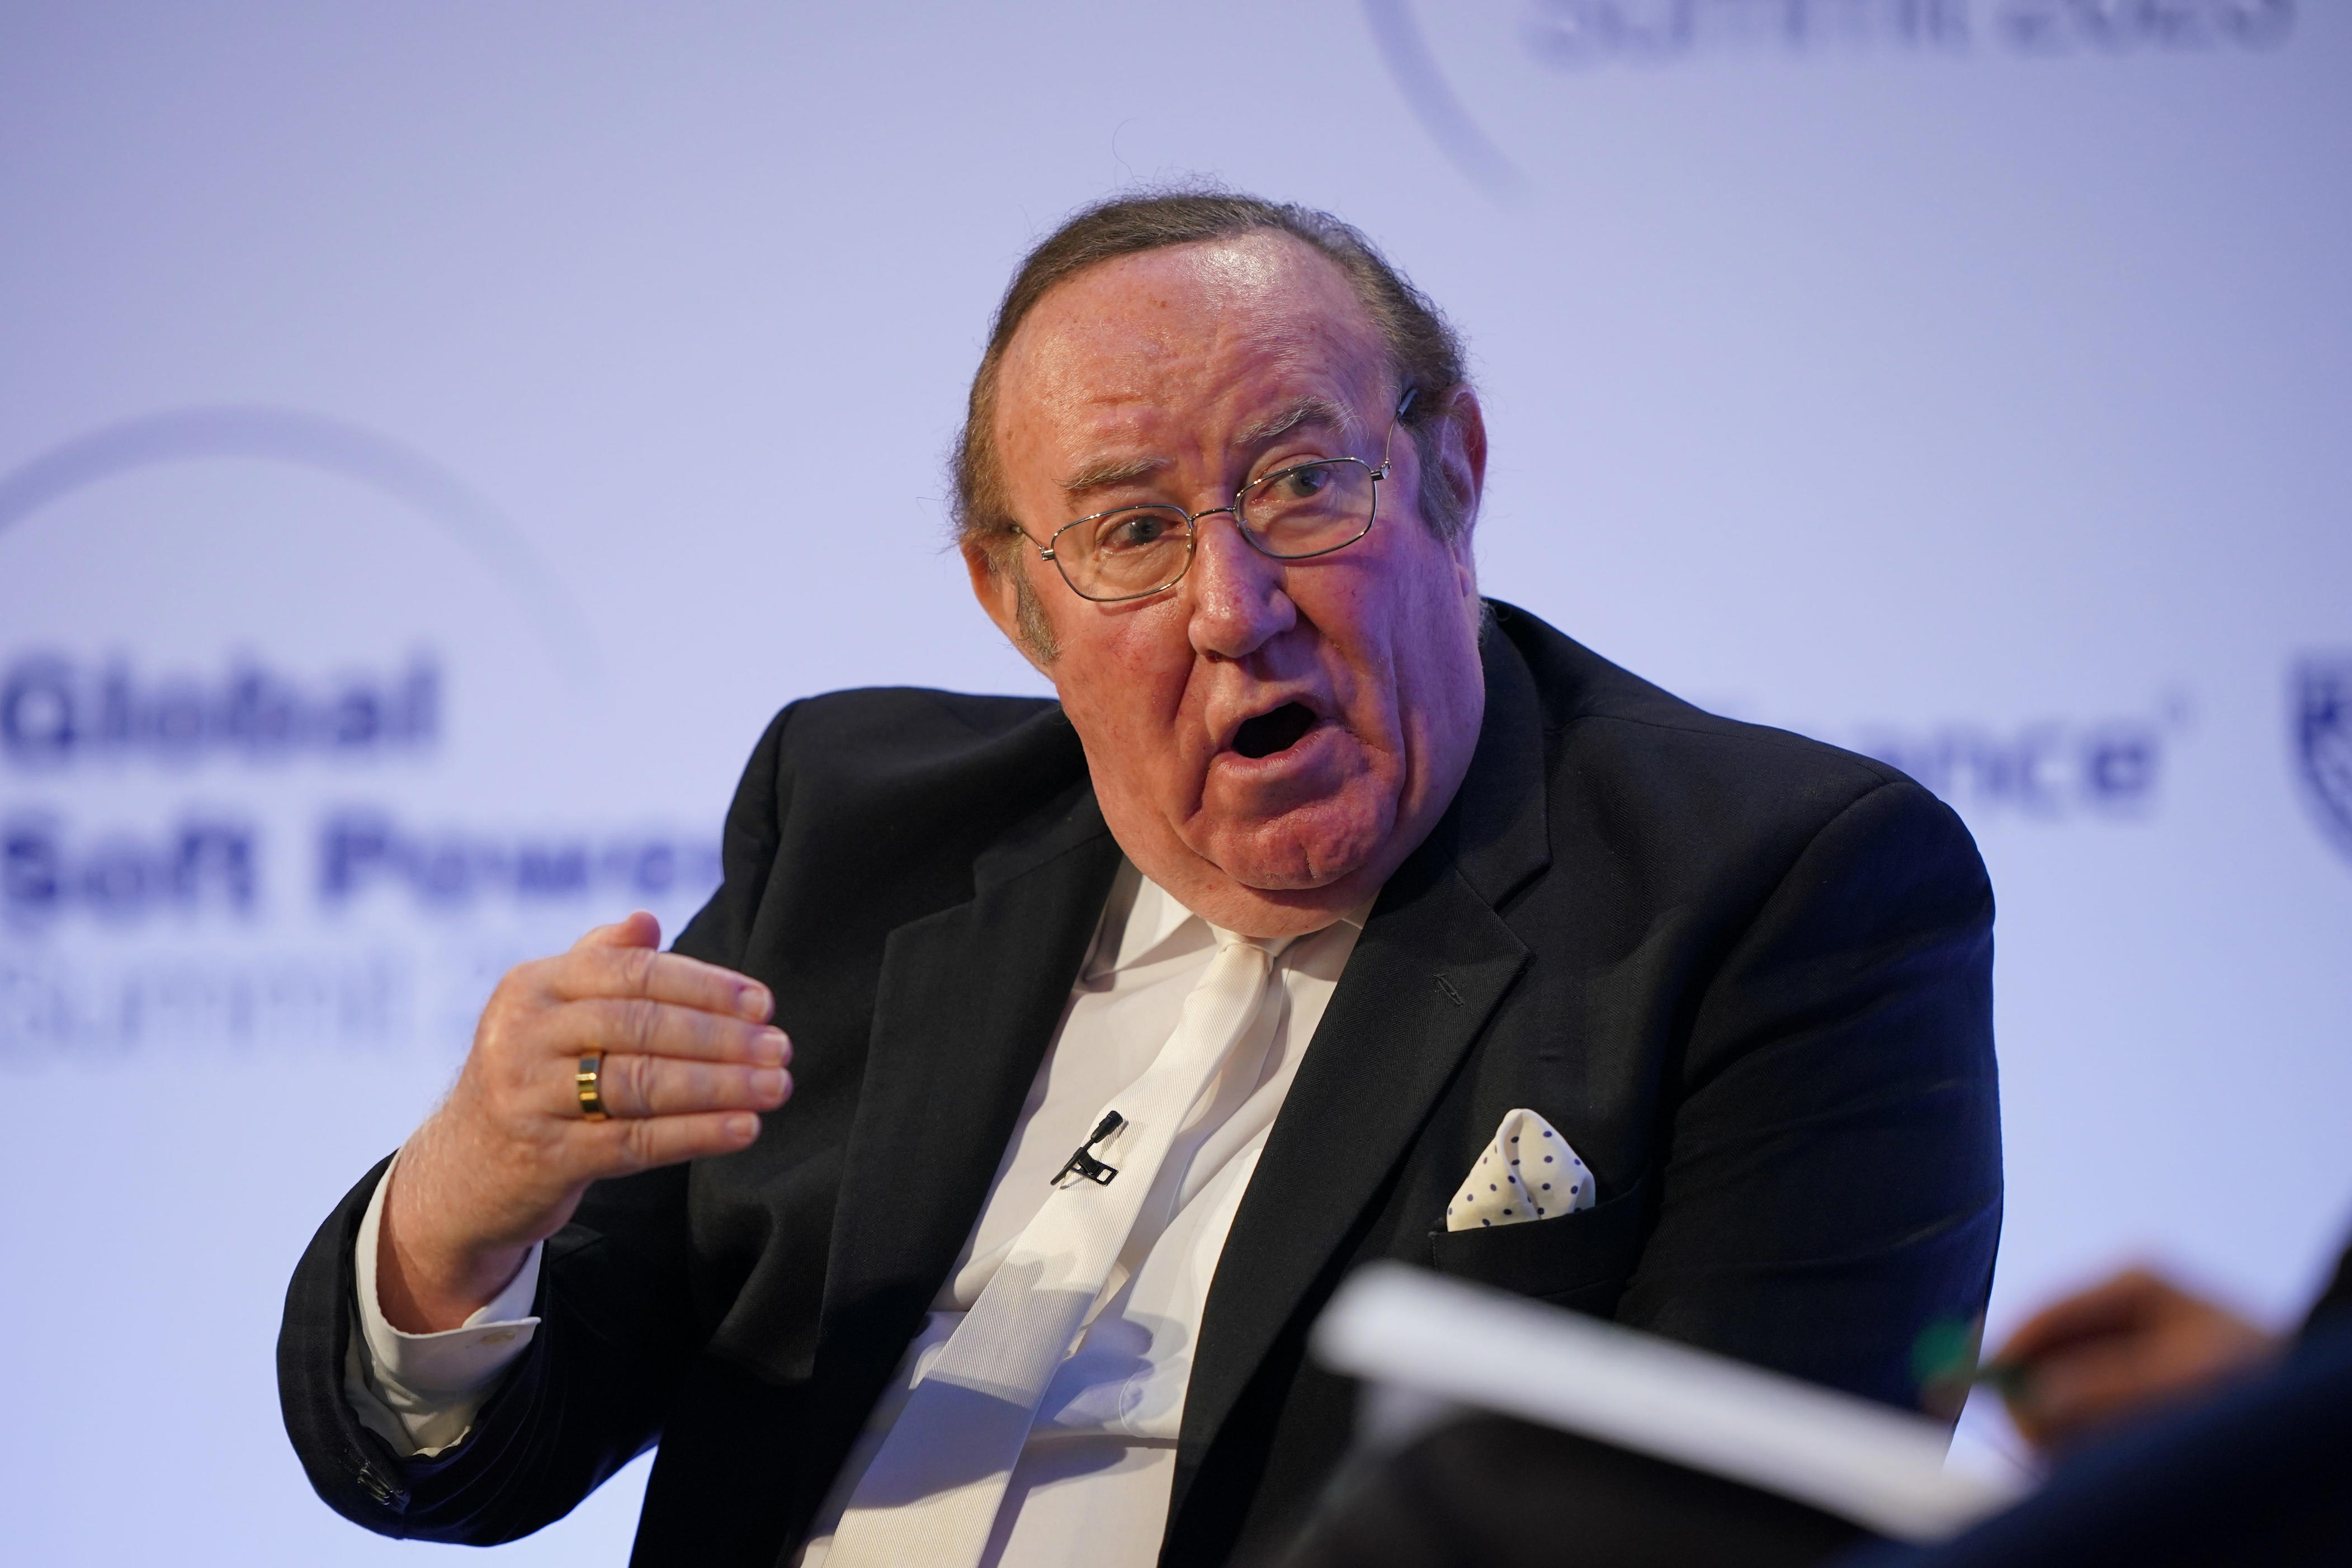 andrew neil didn’t want gb news to be ‘outlet for bizarre conspiracy theories’ at ‘nutty end of politics’